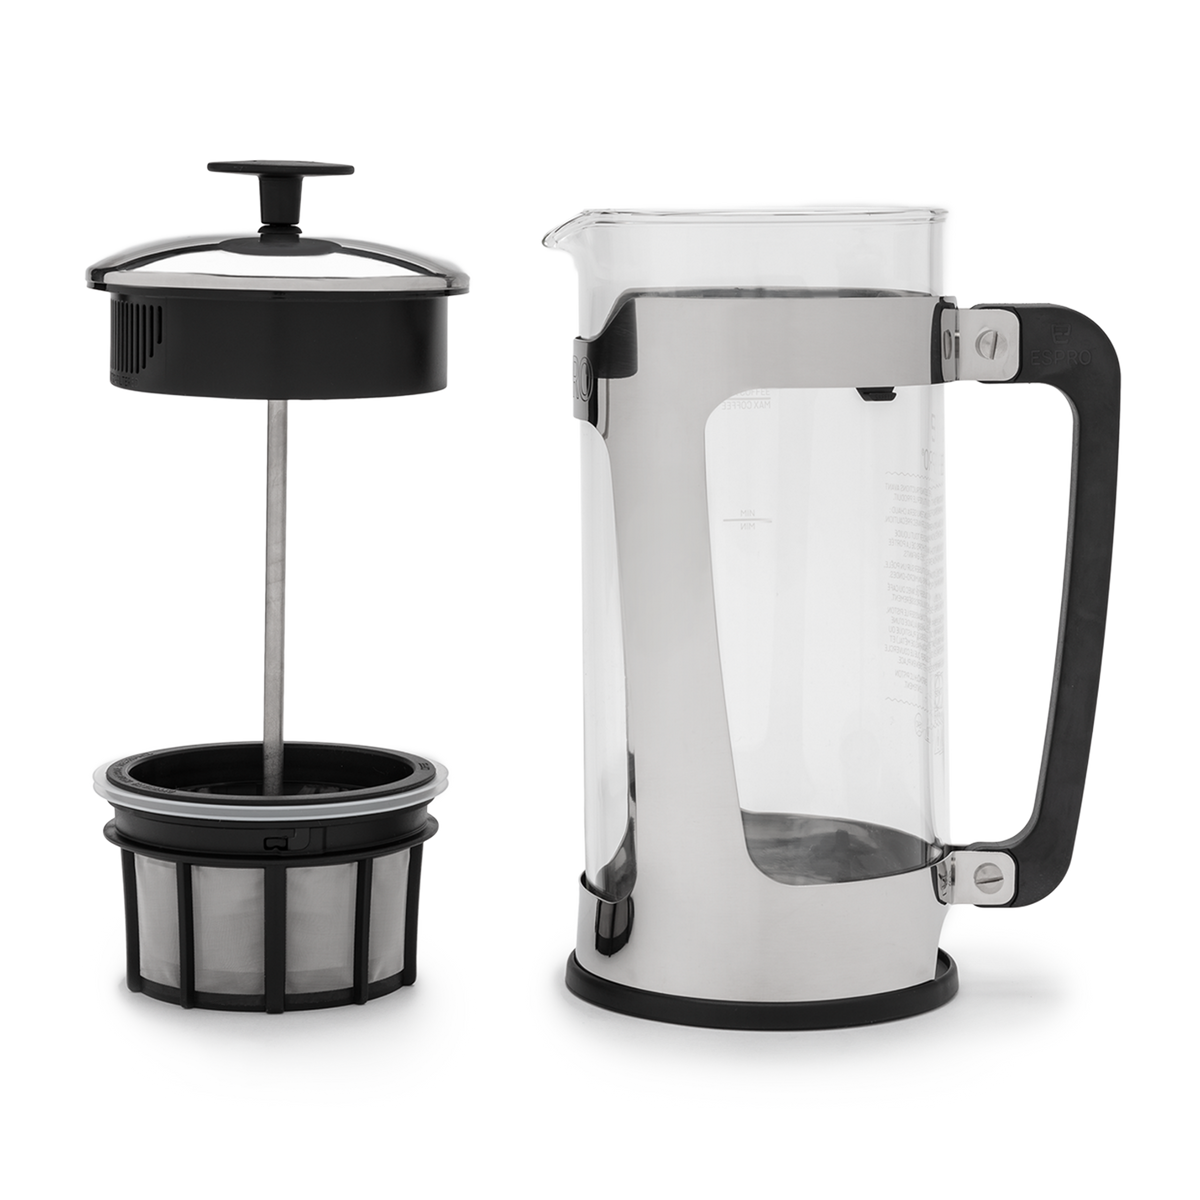 Espro Travel Press: How to make French Press Style Coffee